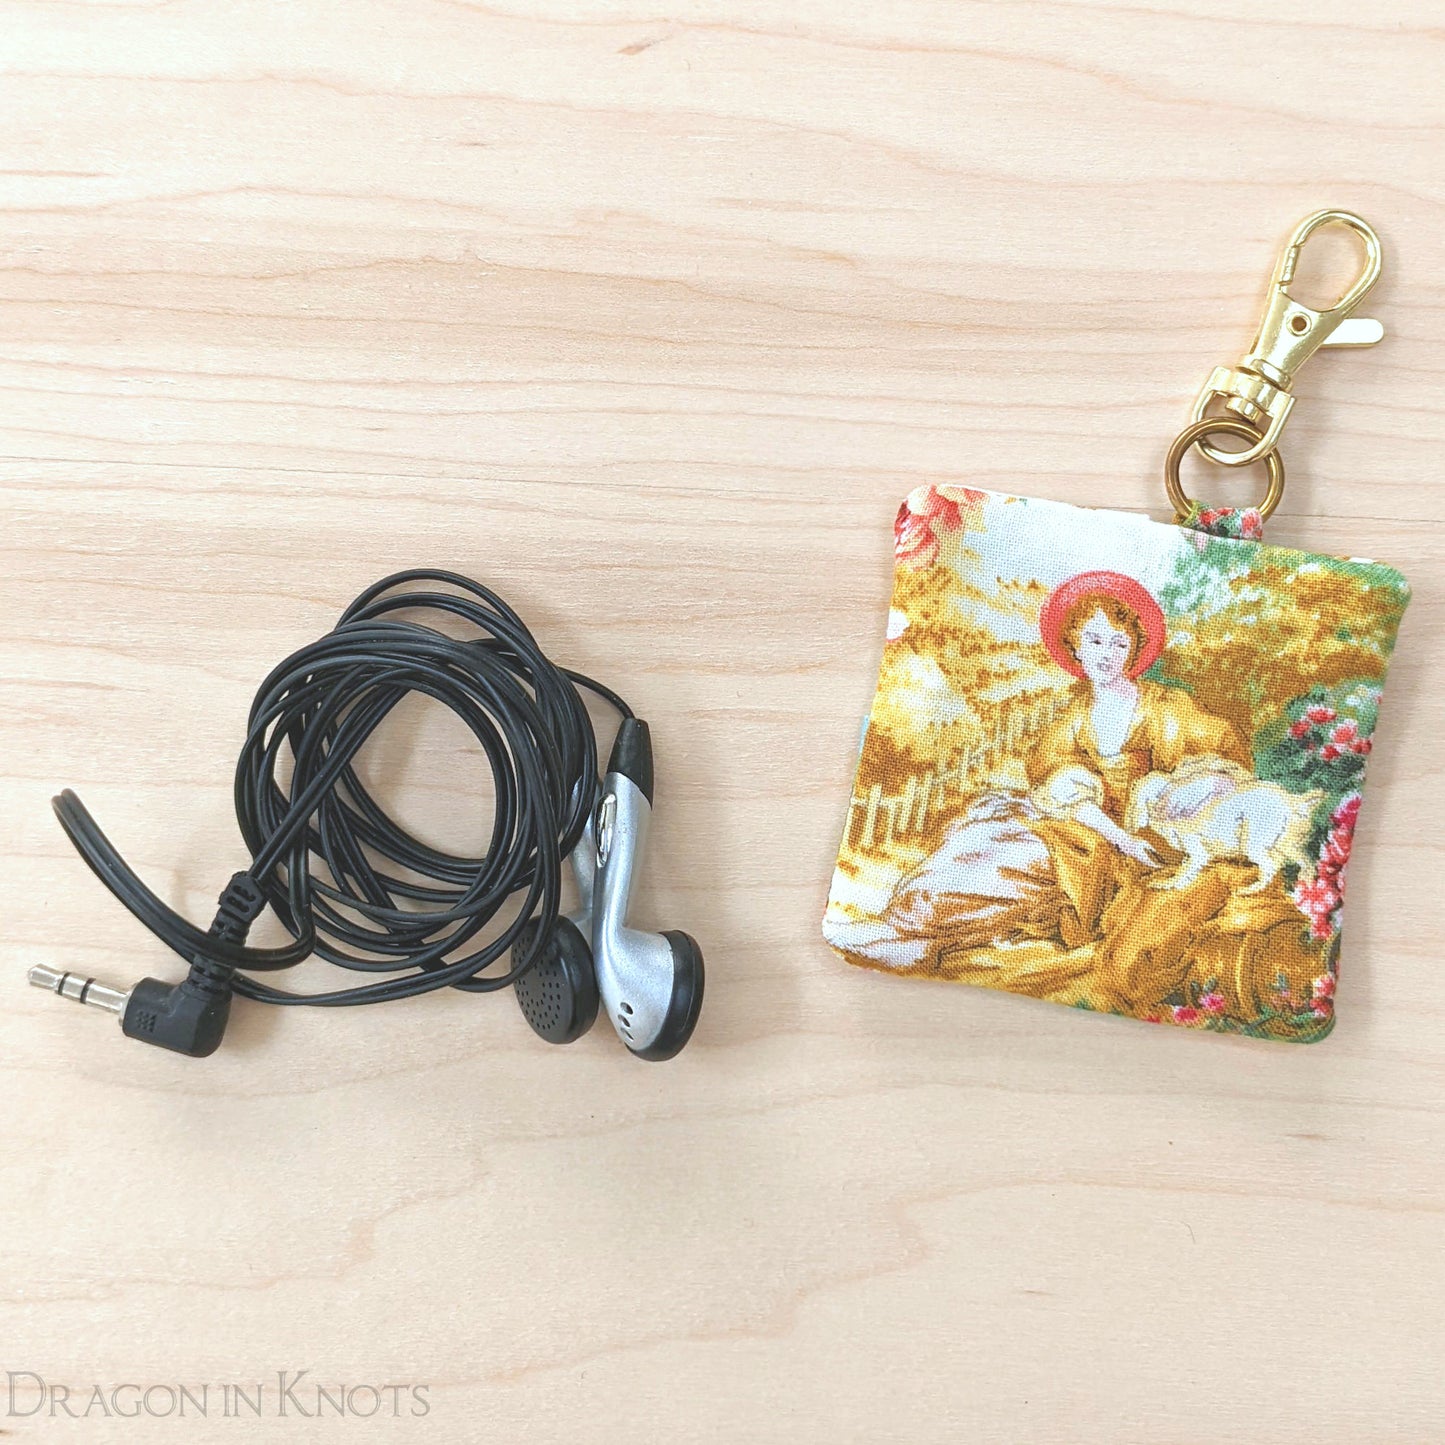 A Lady and her Dog - Earbud Pouch - Dragon in Knots